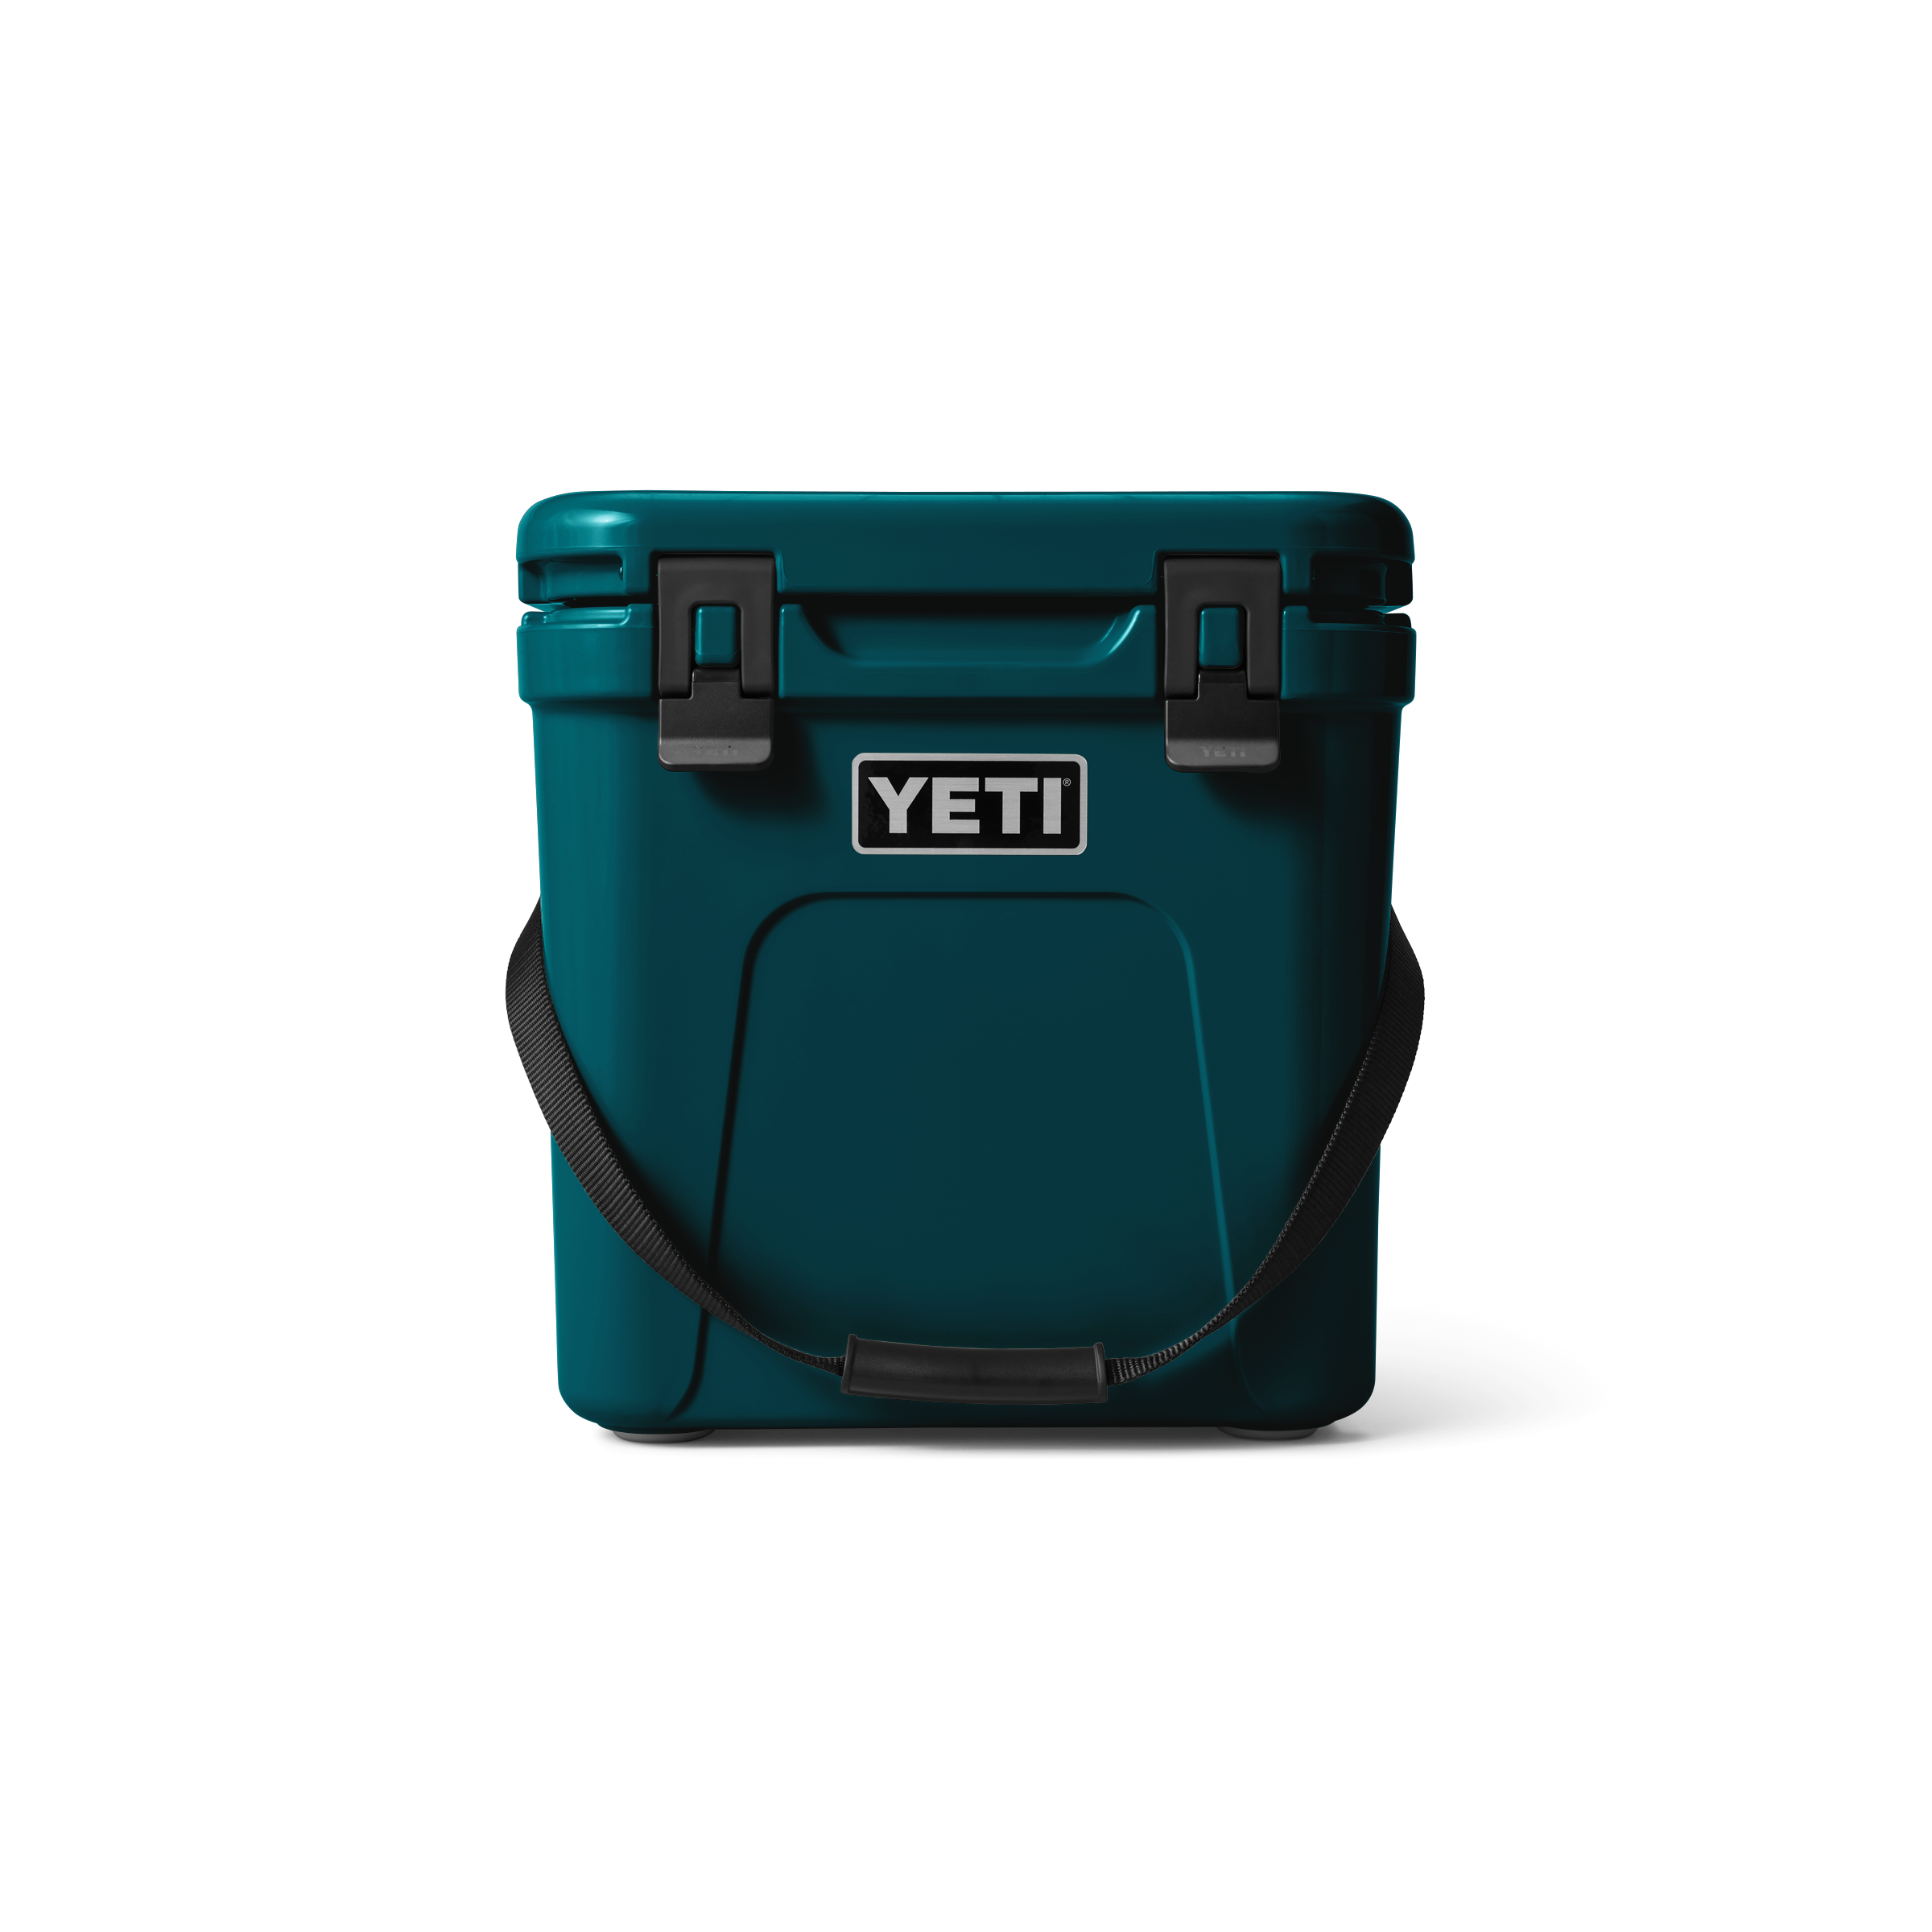 Yeti Roadie 24 - 24 LT / AGAVE TEAL - Mansfield Hunting & Fishing - Products to prepare for Corona Virus